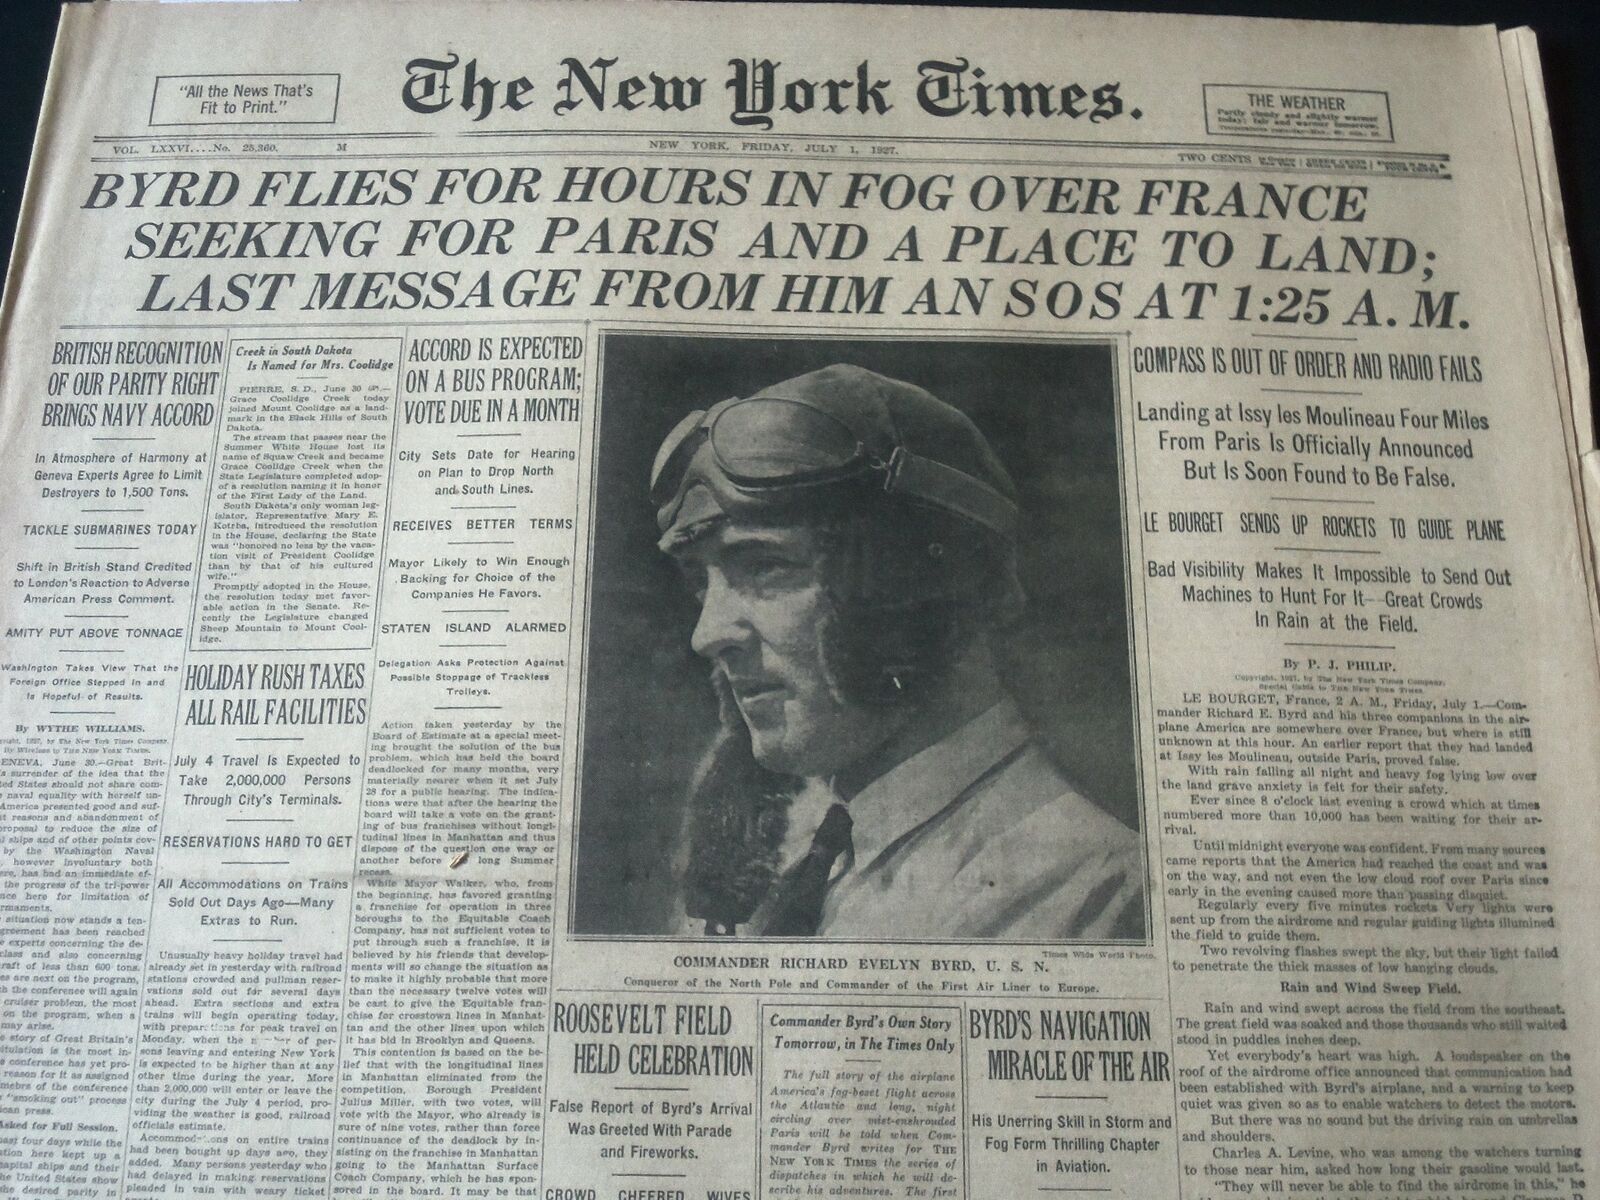 1927 JULY 1 NEW YORK TIMES - BYRD FLIES FOR HOURS IN FOG IN FRANCE - NT 7308